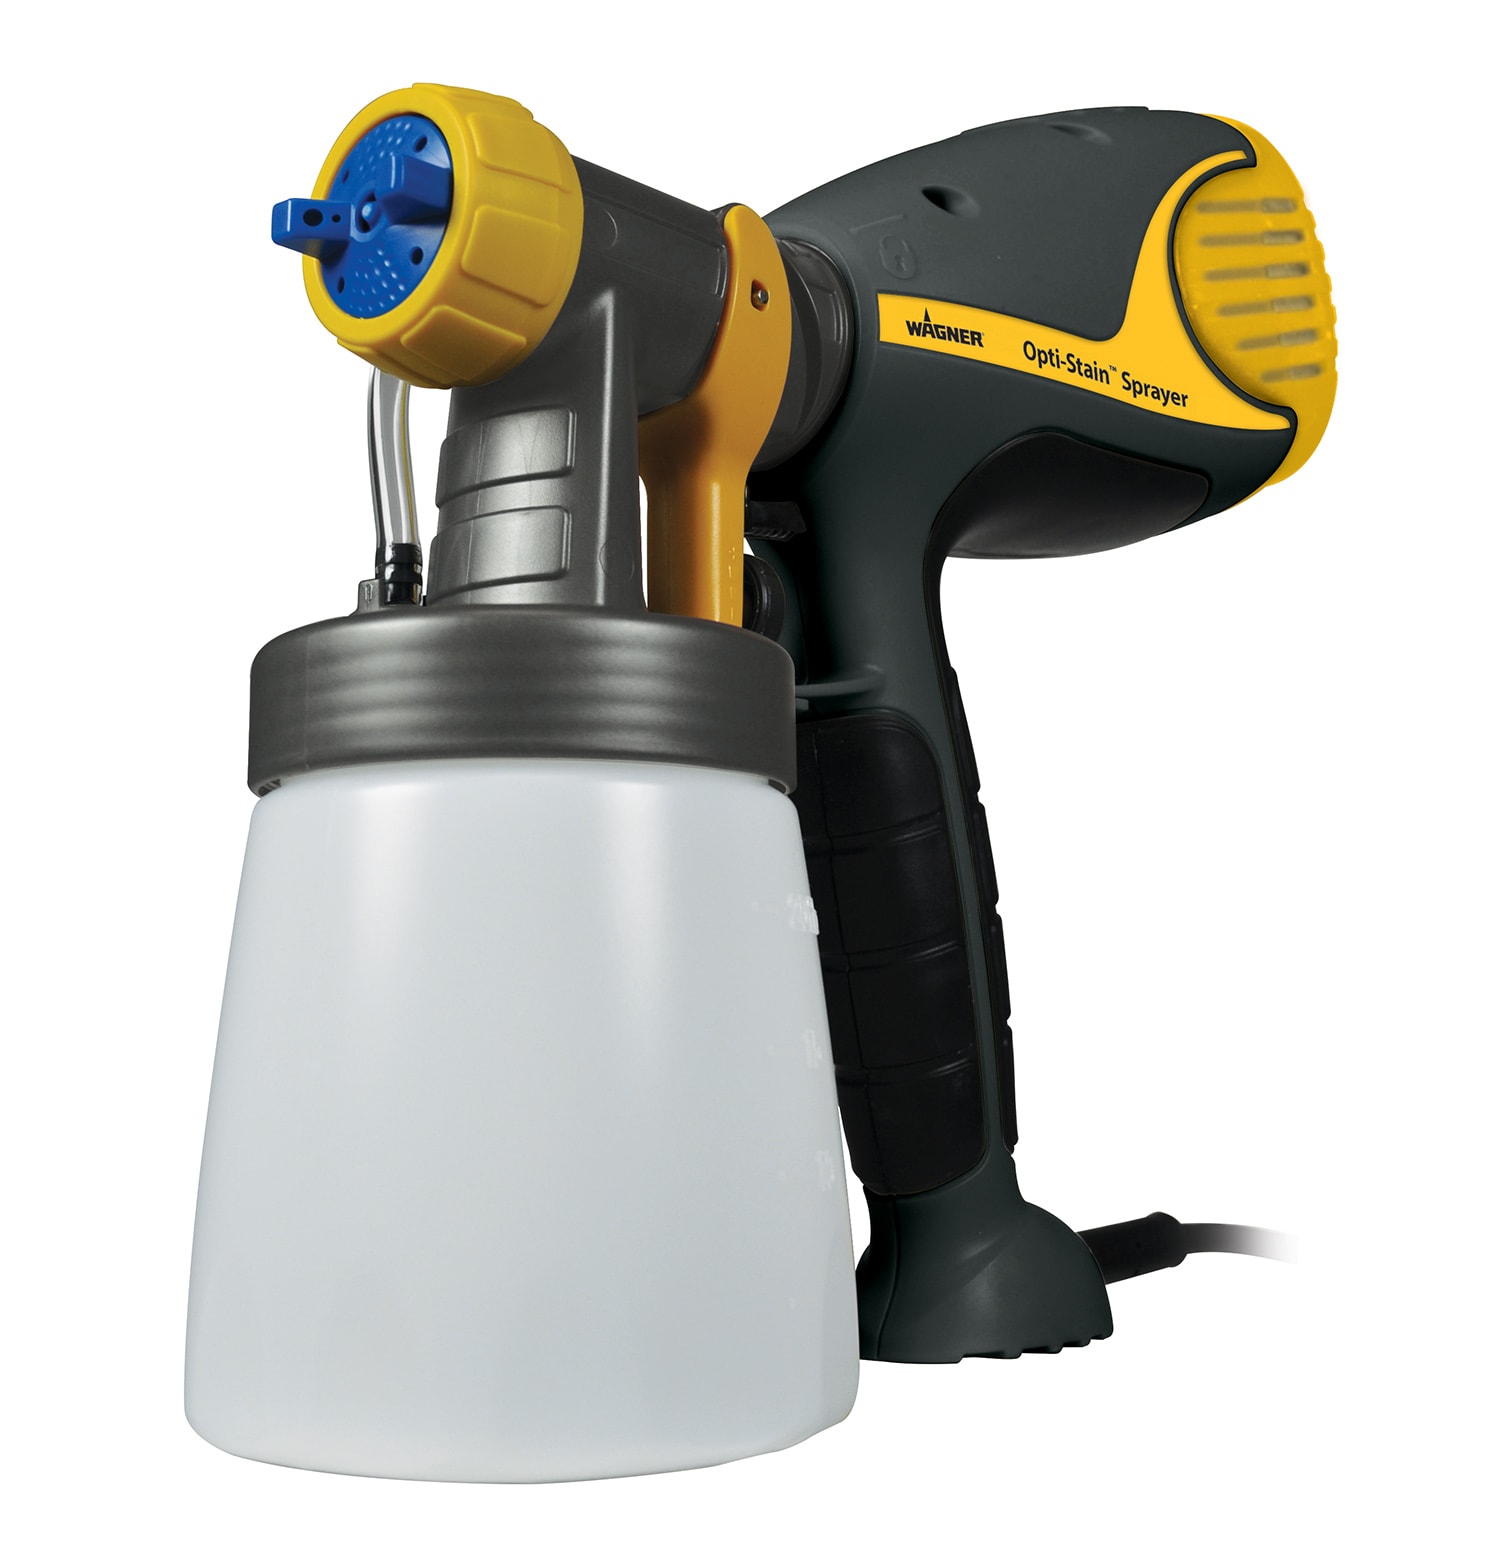 Wagner Handheld HVLP Paint Sprayer (Compatible with Stains) at